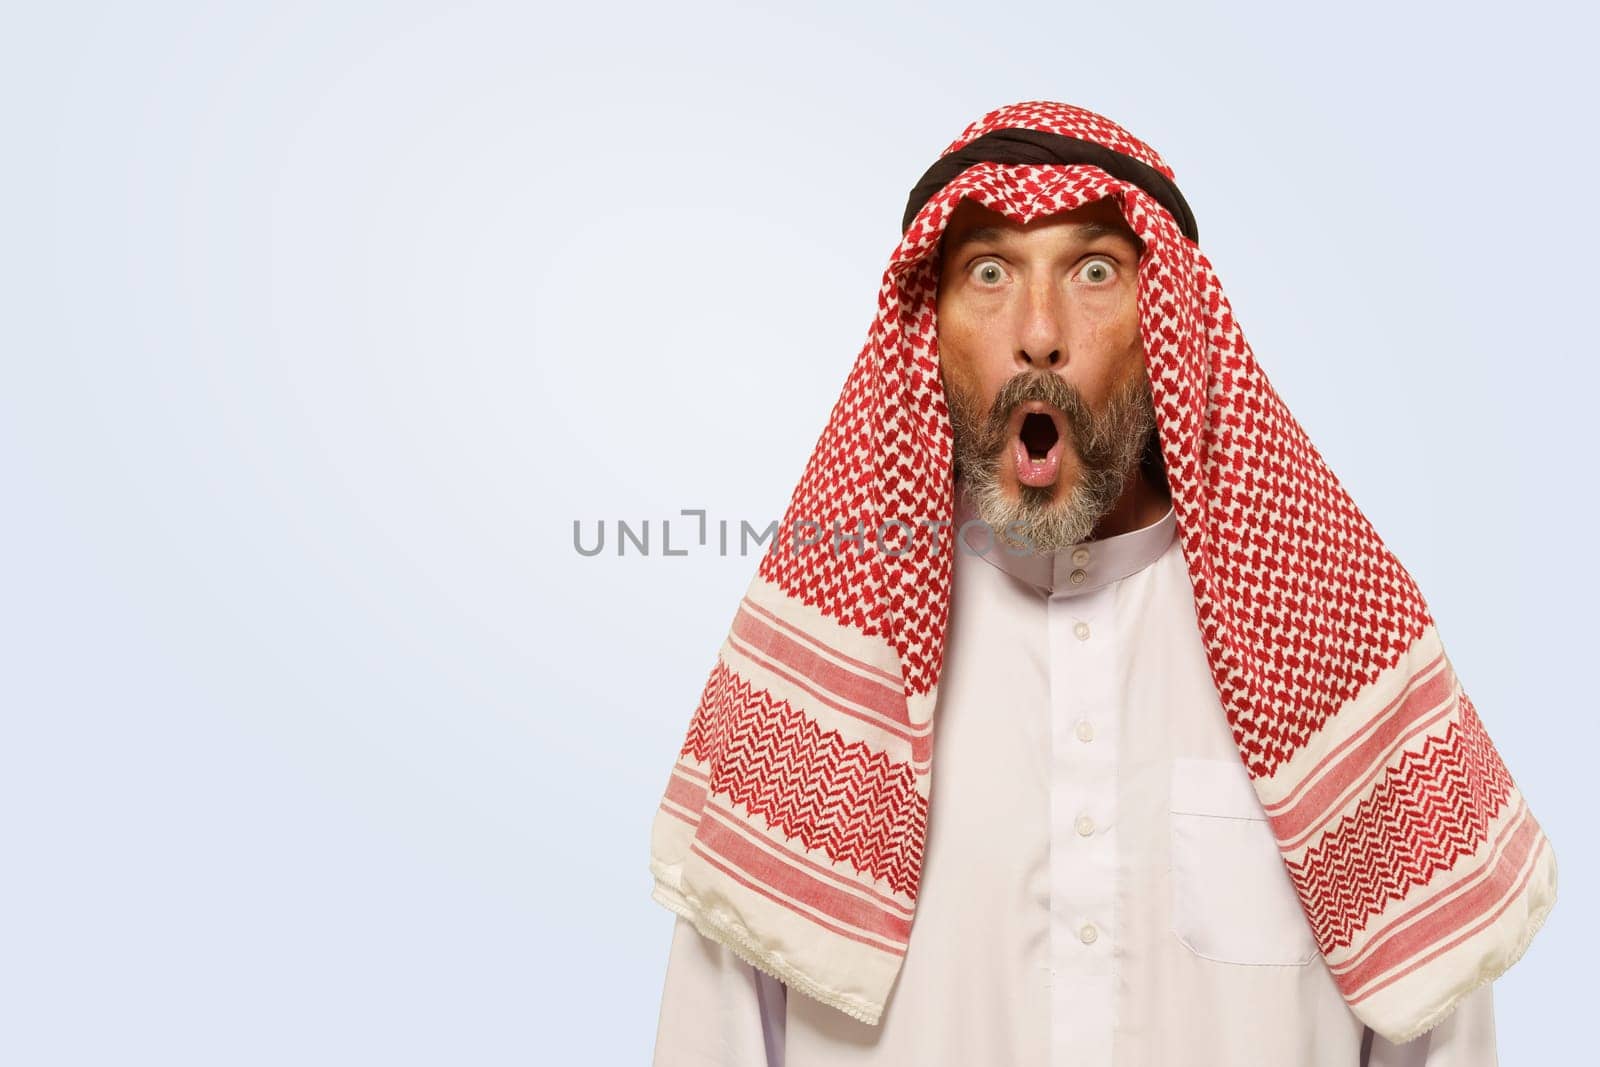 Arabian man, in keffiyeh, displays expression with shock, surprise and frustration, reflected by opened mouth. He isolated on gentle light blue background, illustrating cultural identity of ethnic group. by LipikStockMedia